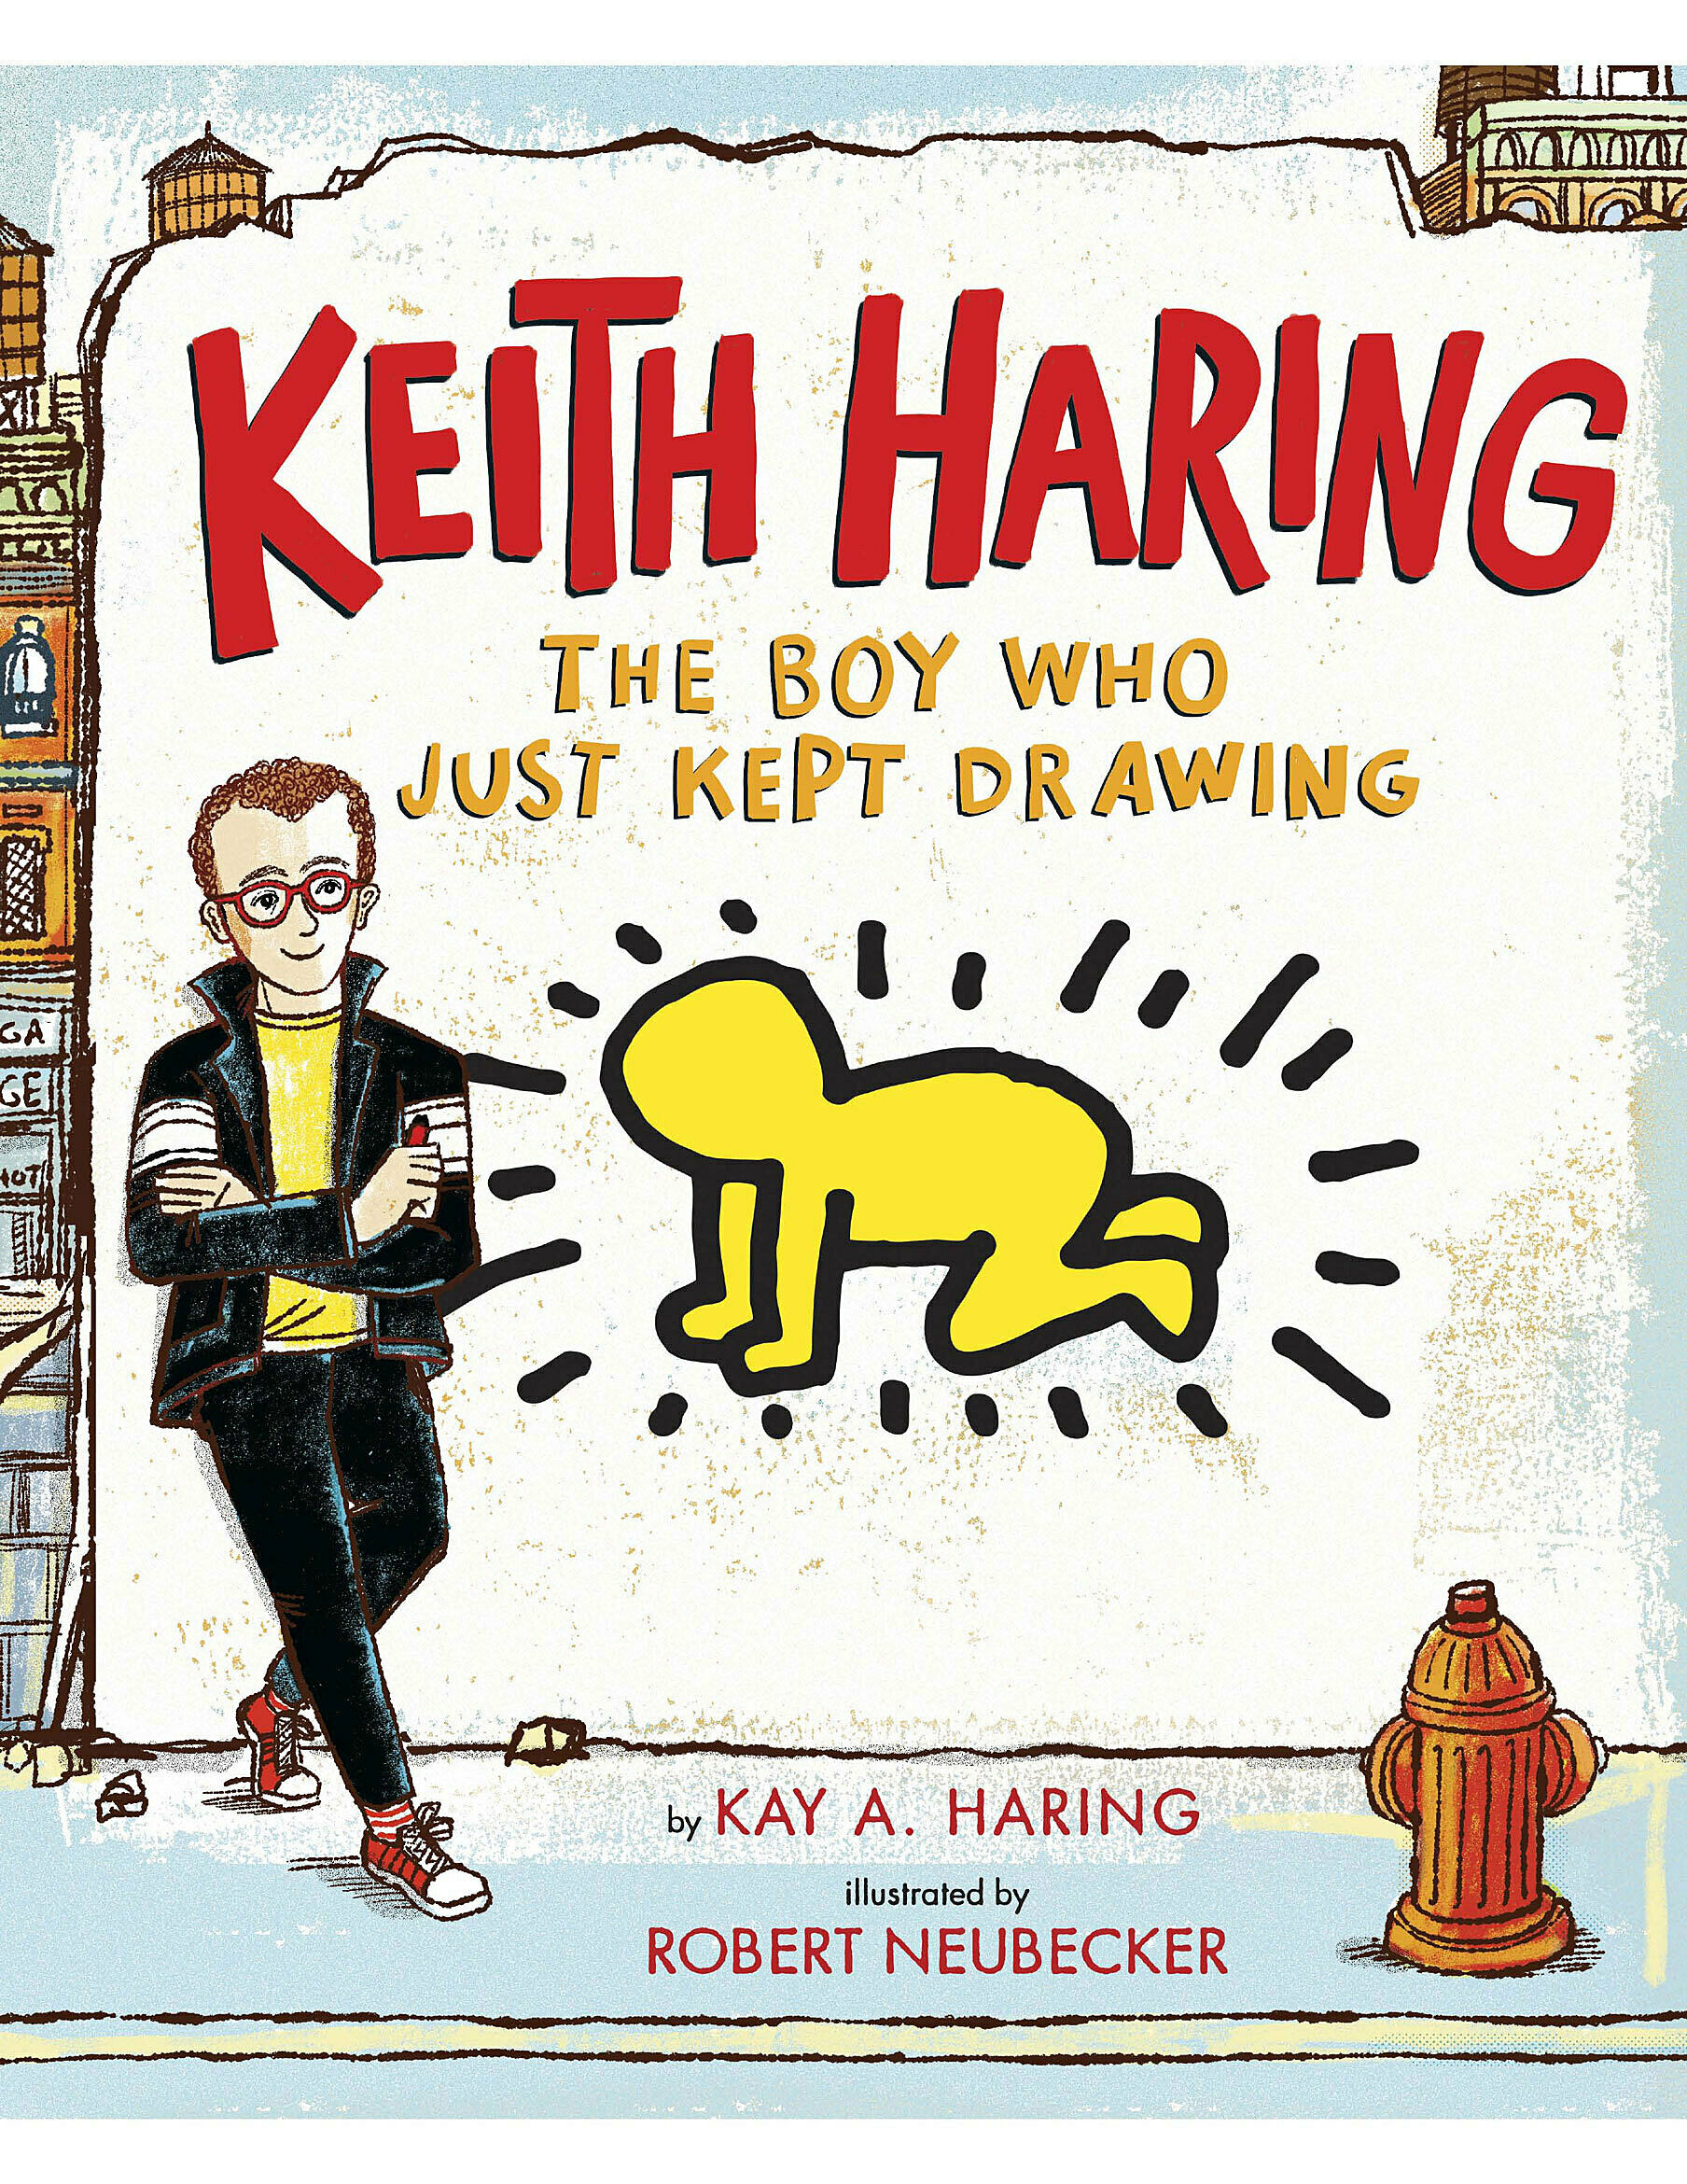 Cover for Kay Haring's book